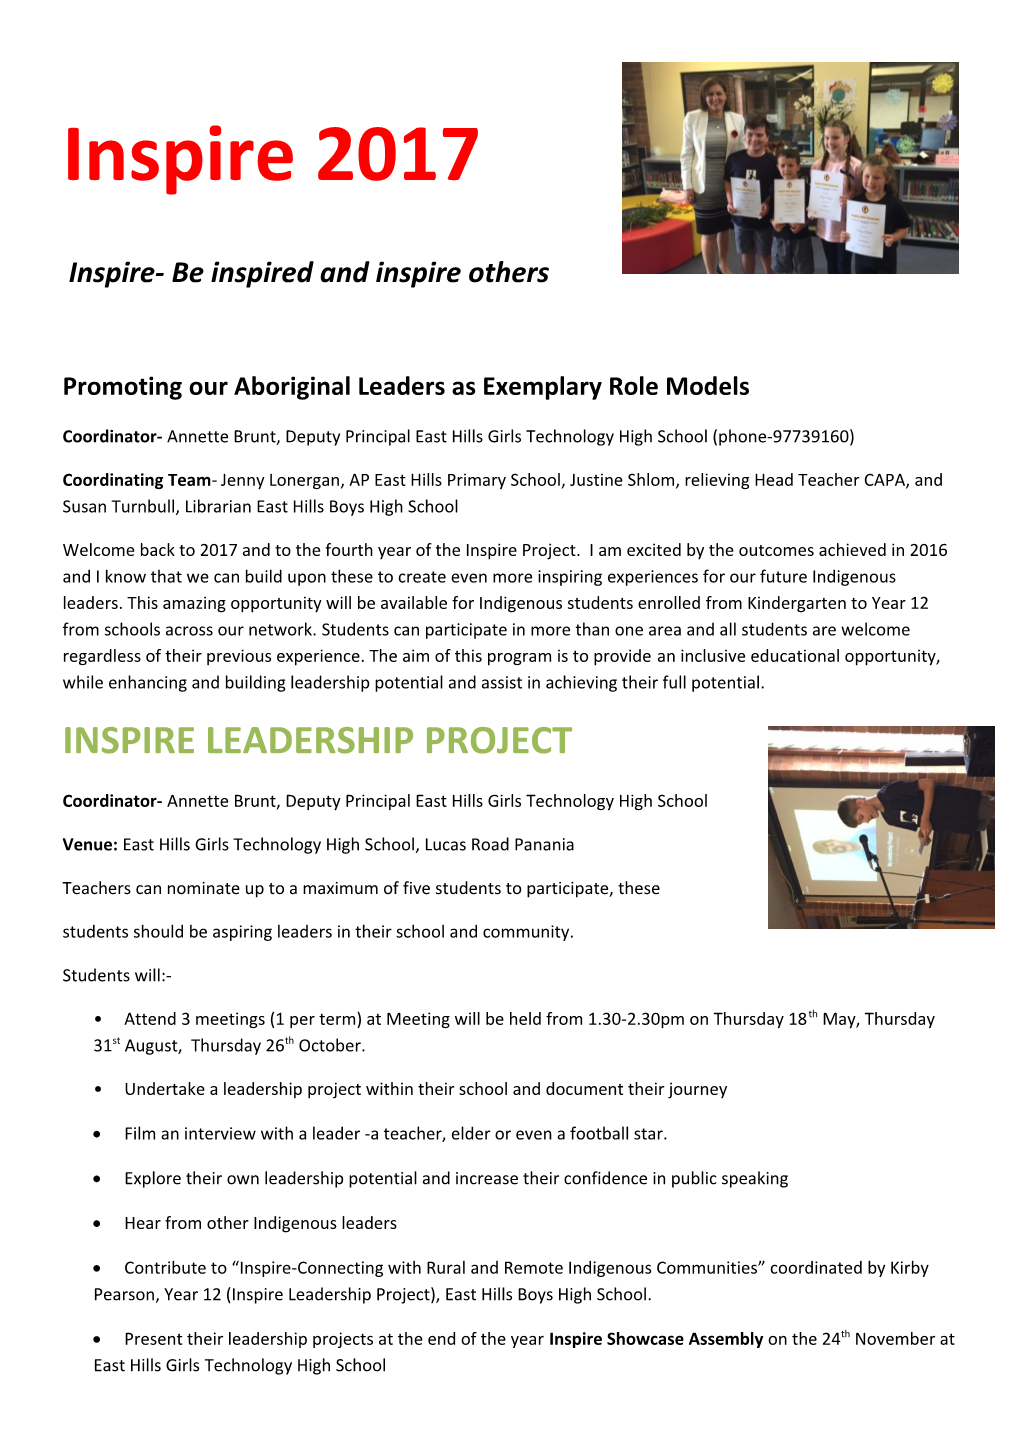 Promoting Our Aboriginal Leaders As Exemplary Role Models